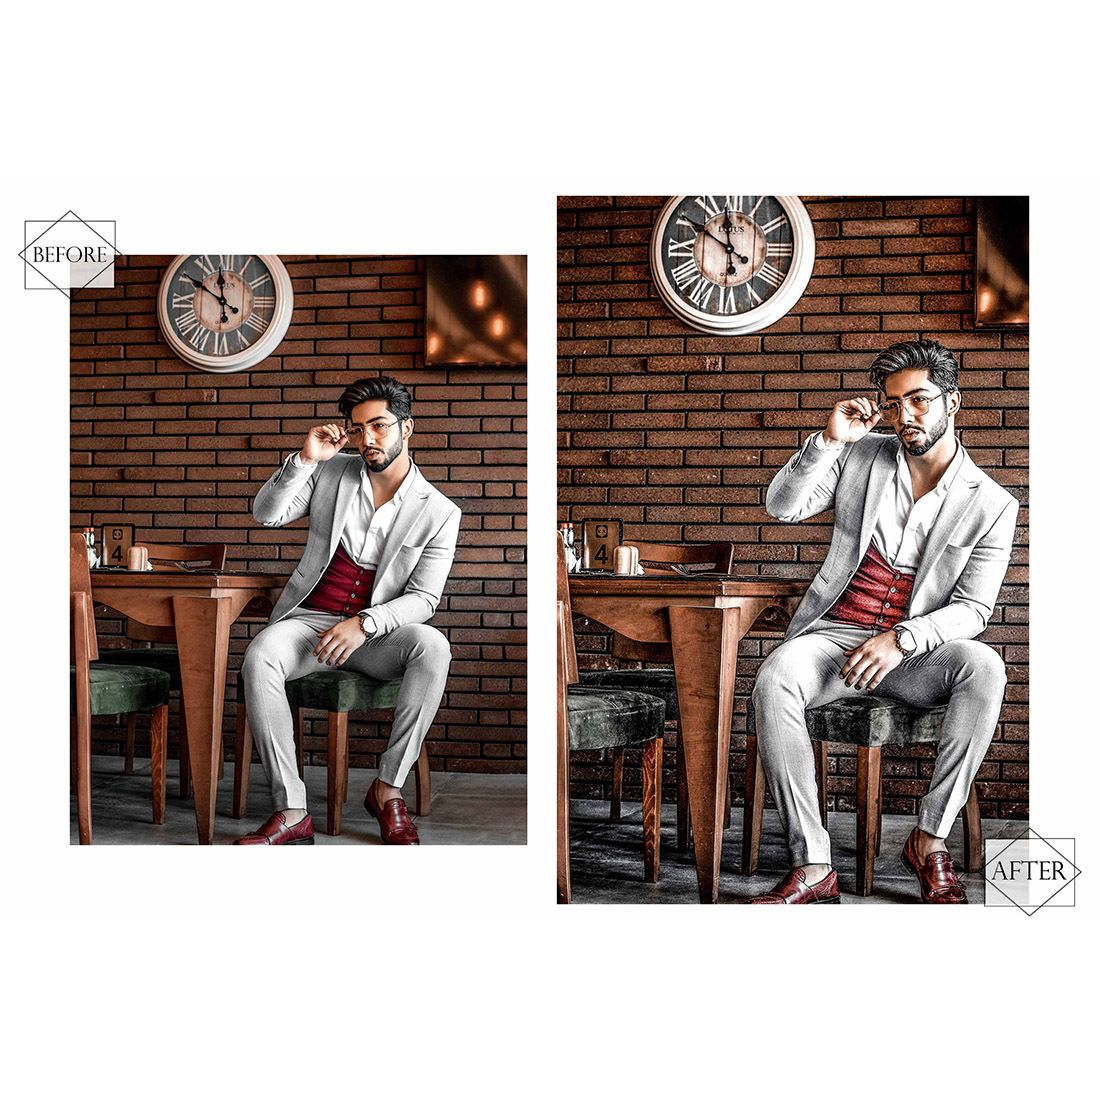 12 Photoshop Actions, Dreamboat Man Ps Action, Hue HDR ACR Preset, Saturation Filter, monotone And Lifestyle Theme For Instagram, Men Blogger, Bronze portrait preview image.